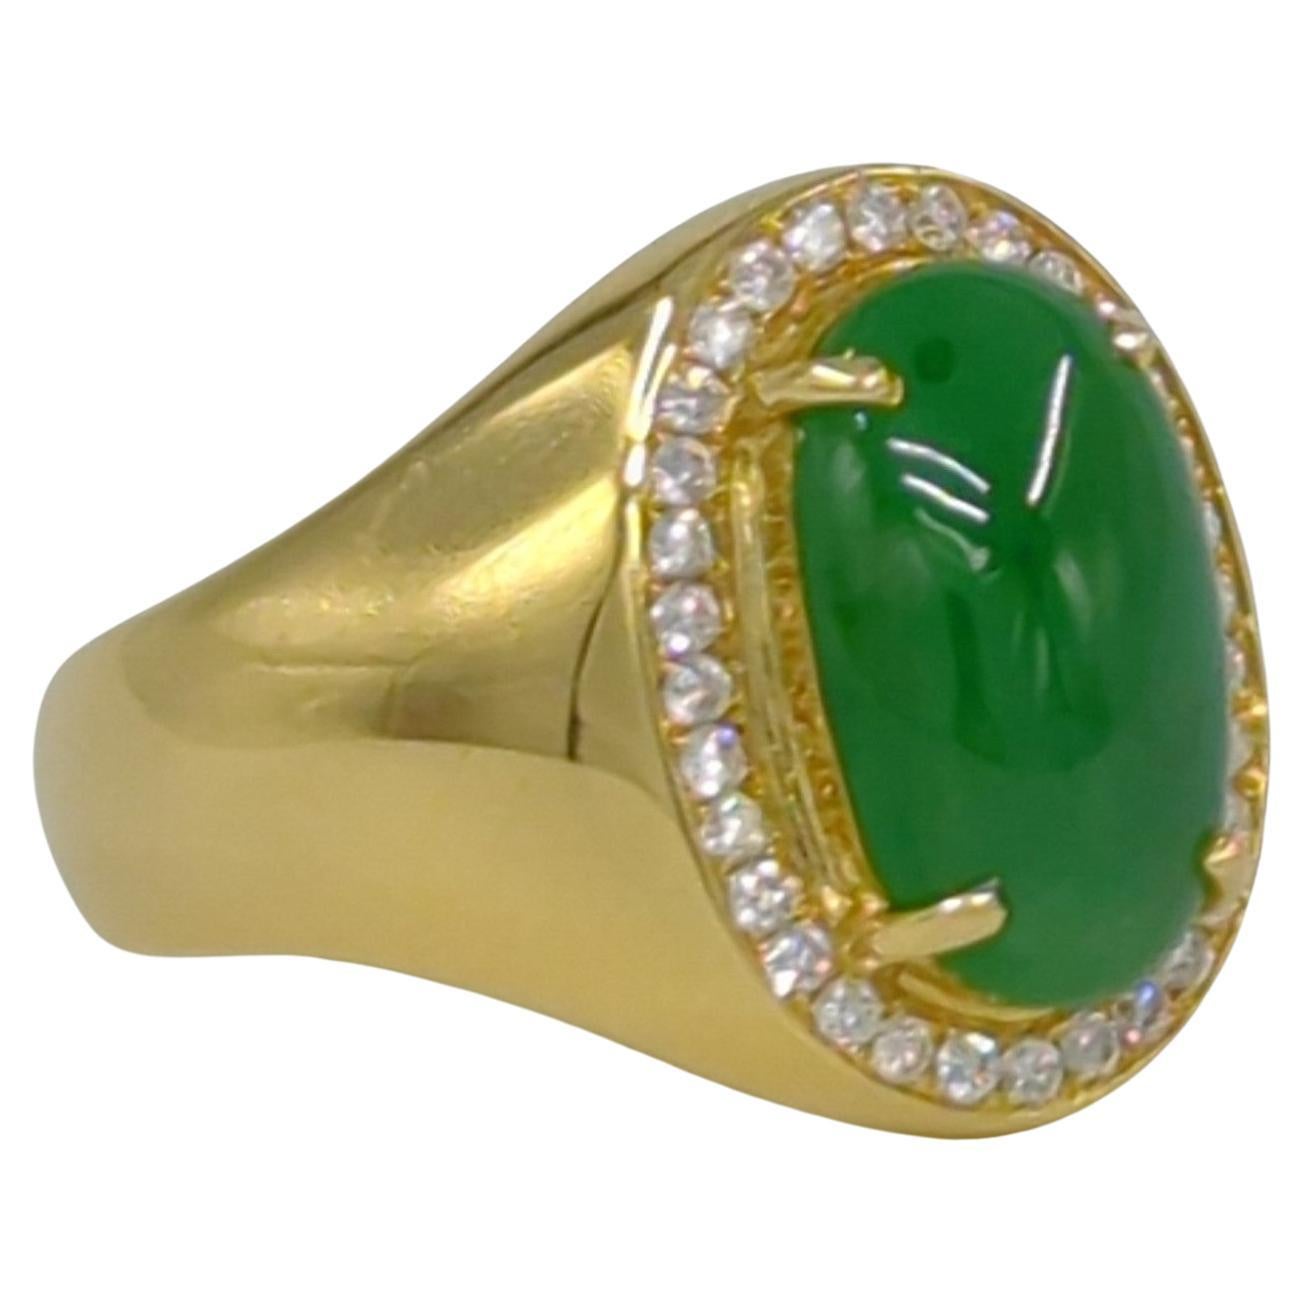 This exquisite ladies' ring is crafted in 18K white gold and weighs 6.50 grams. It features a stunning oval cabochon of intense green jadeite at its center. The jadeite is of A-grade quality, as certified by the NGTC (National Gemstone Testing